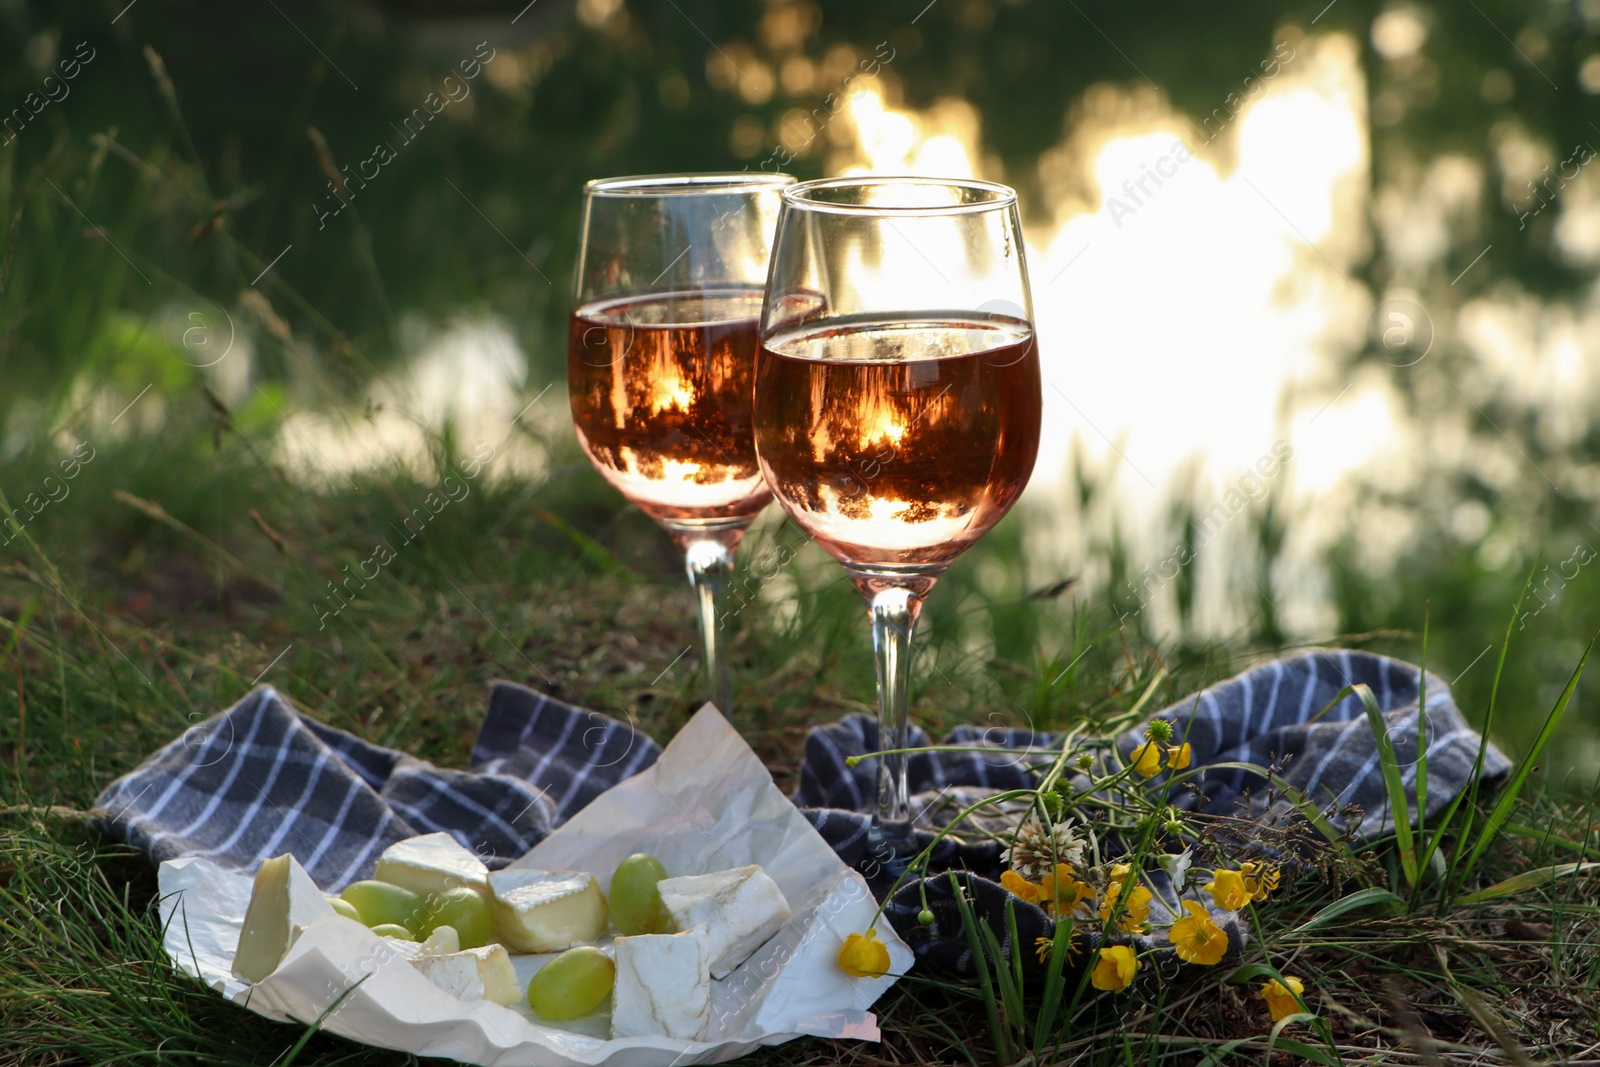 Photo of Glasses of delicious rose wine, cheese and grapes on picnic blanket near lake